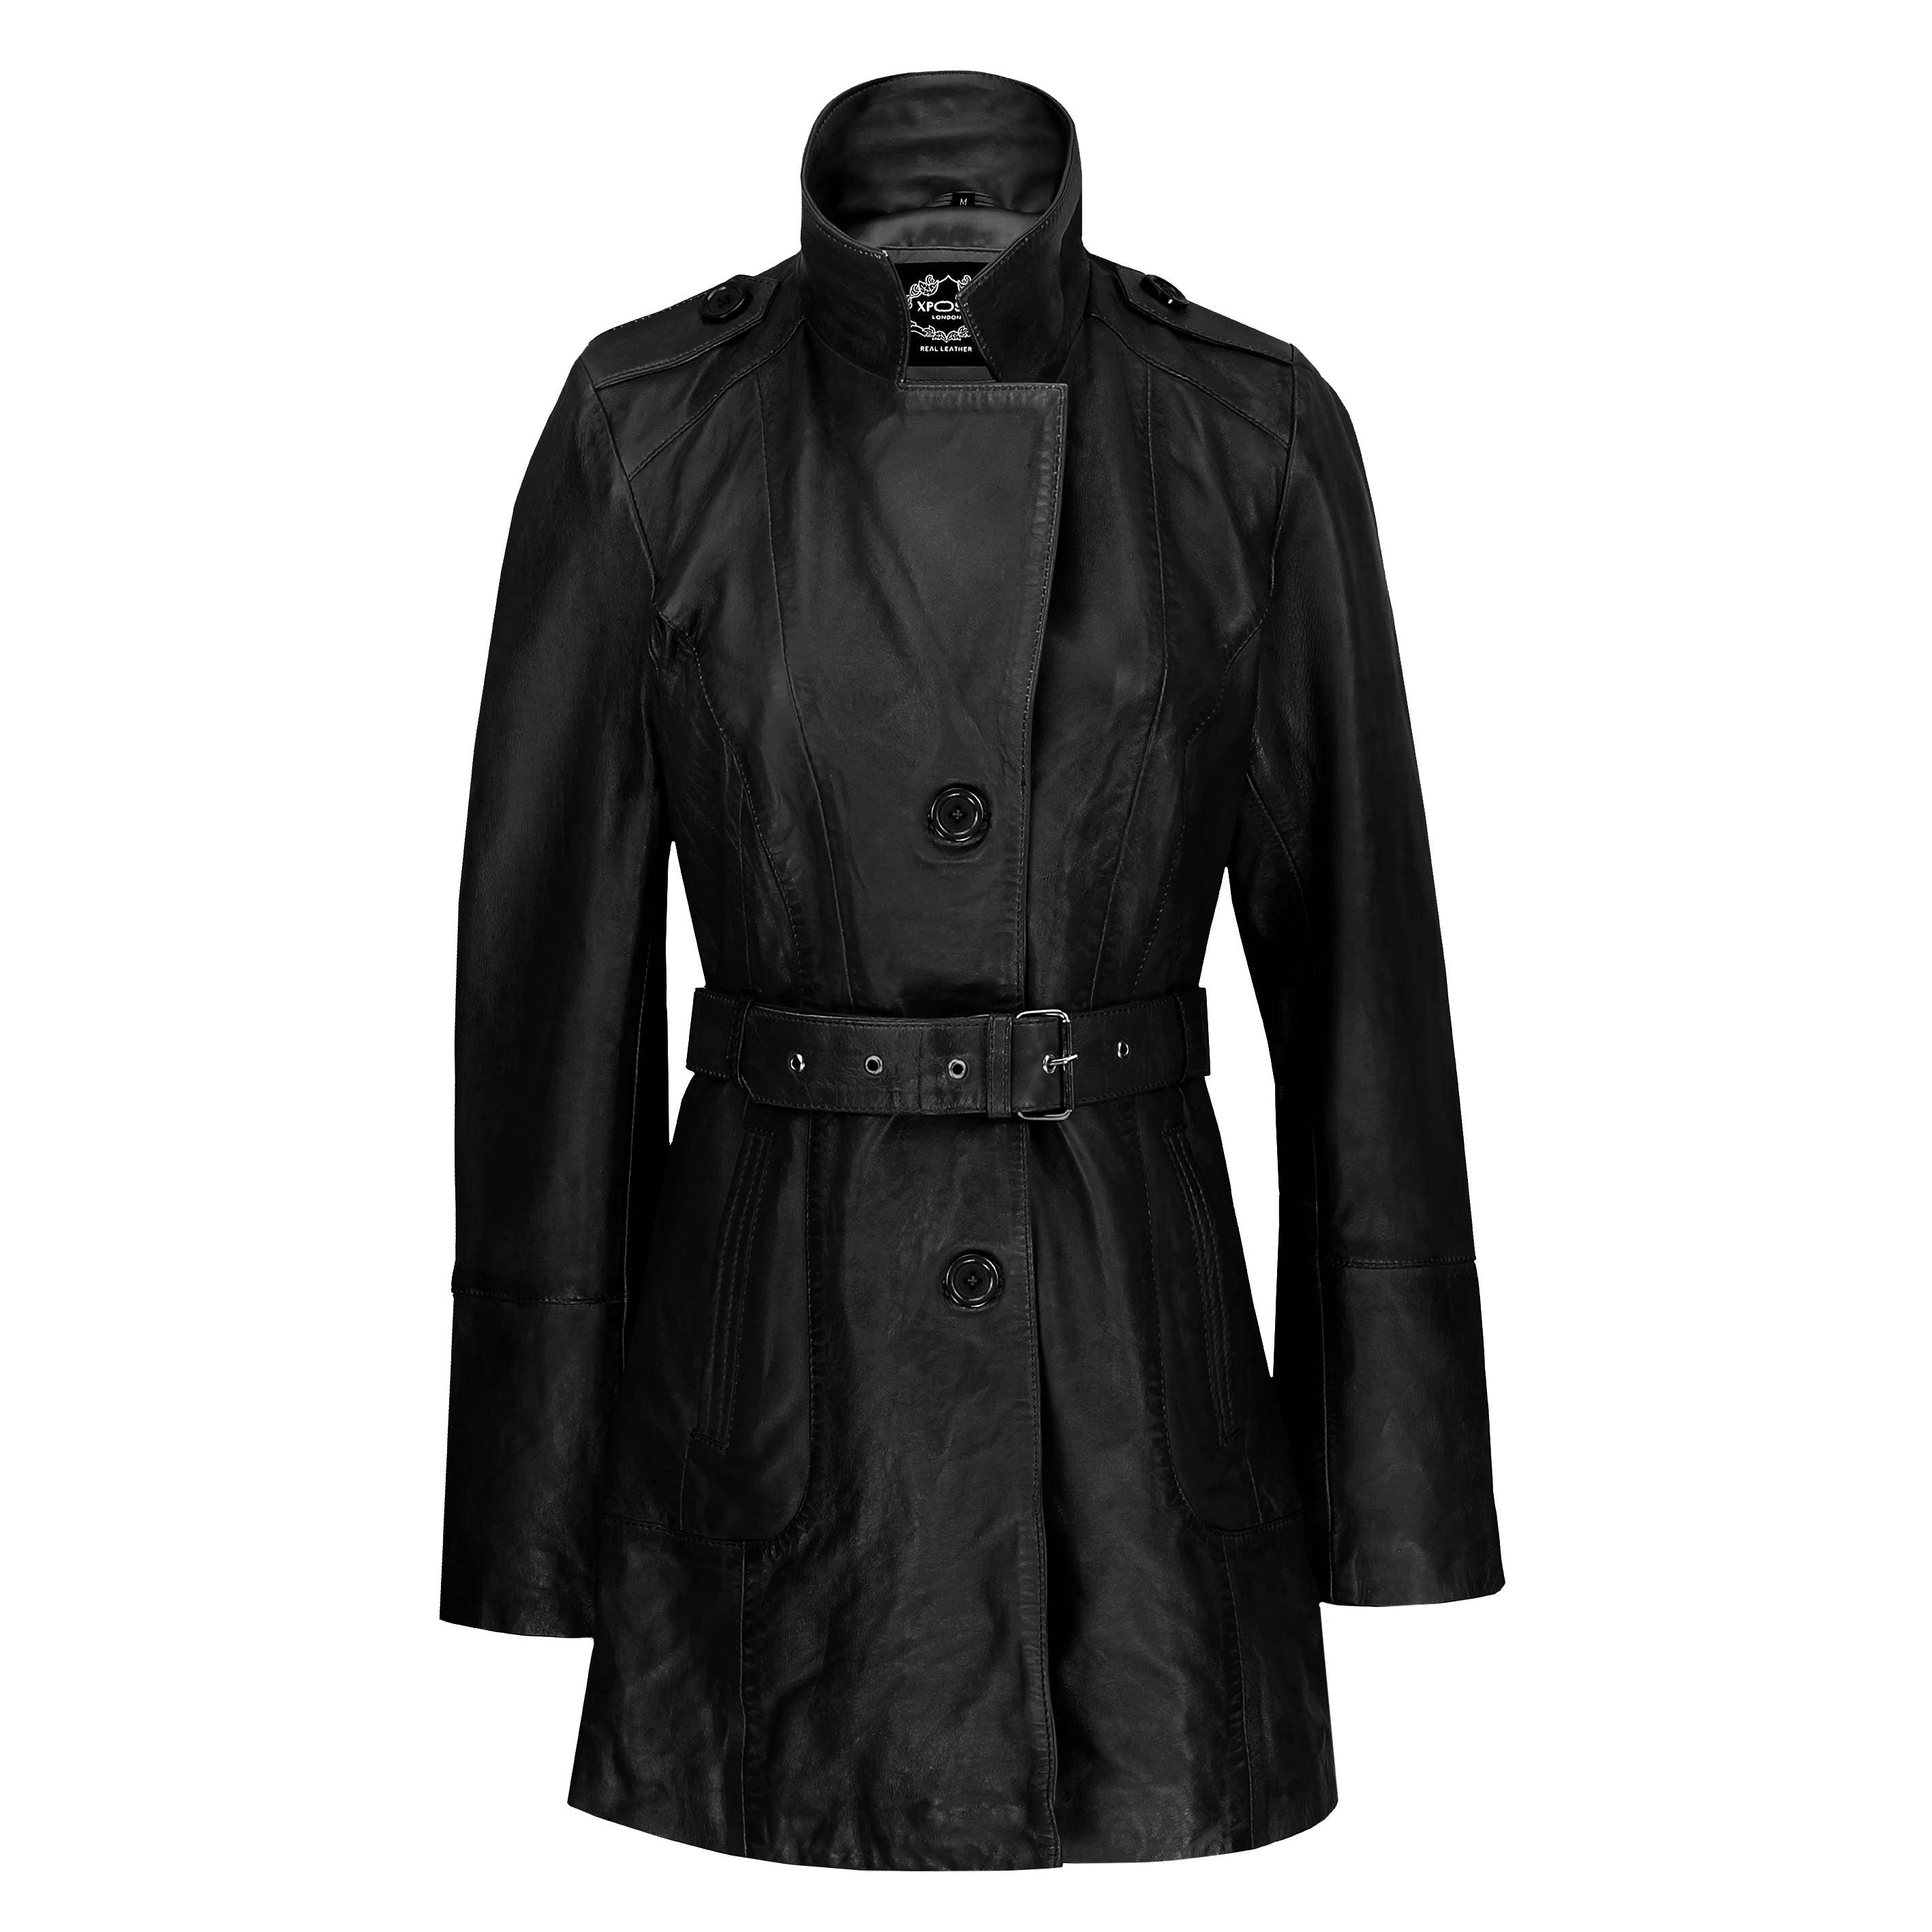 WOMEN'S CLASSIC TRENCH JACKET